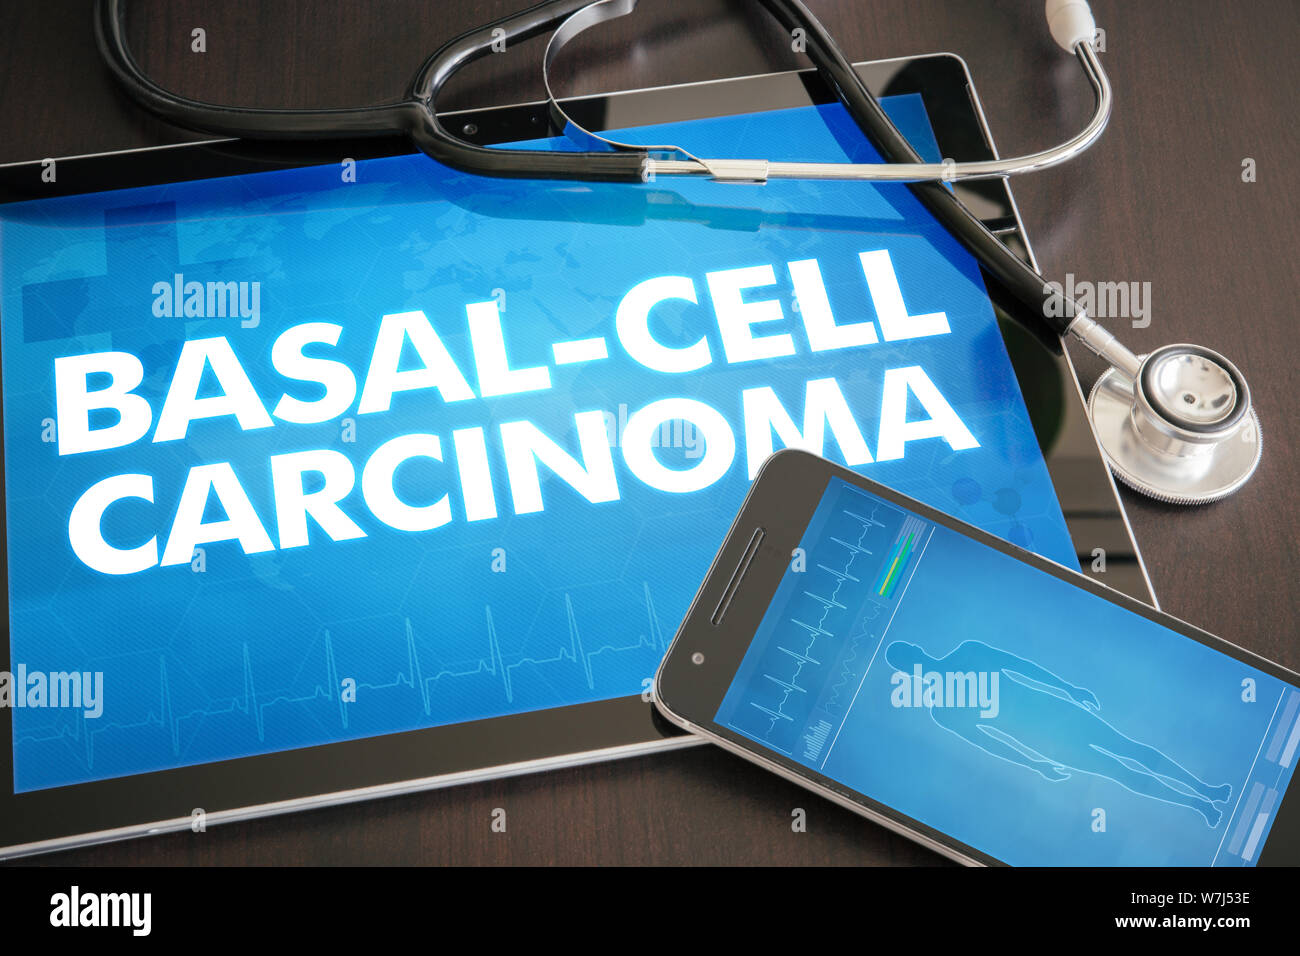 Basal-cell carcinoma (cancer type) diagnosis medical concept on tablet screen with stethoscope. Stock Photo